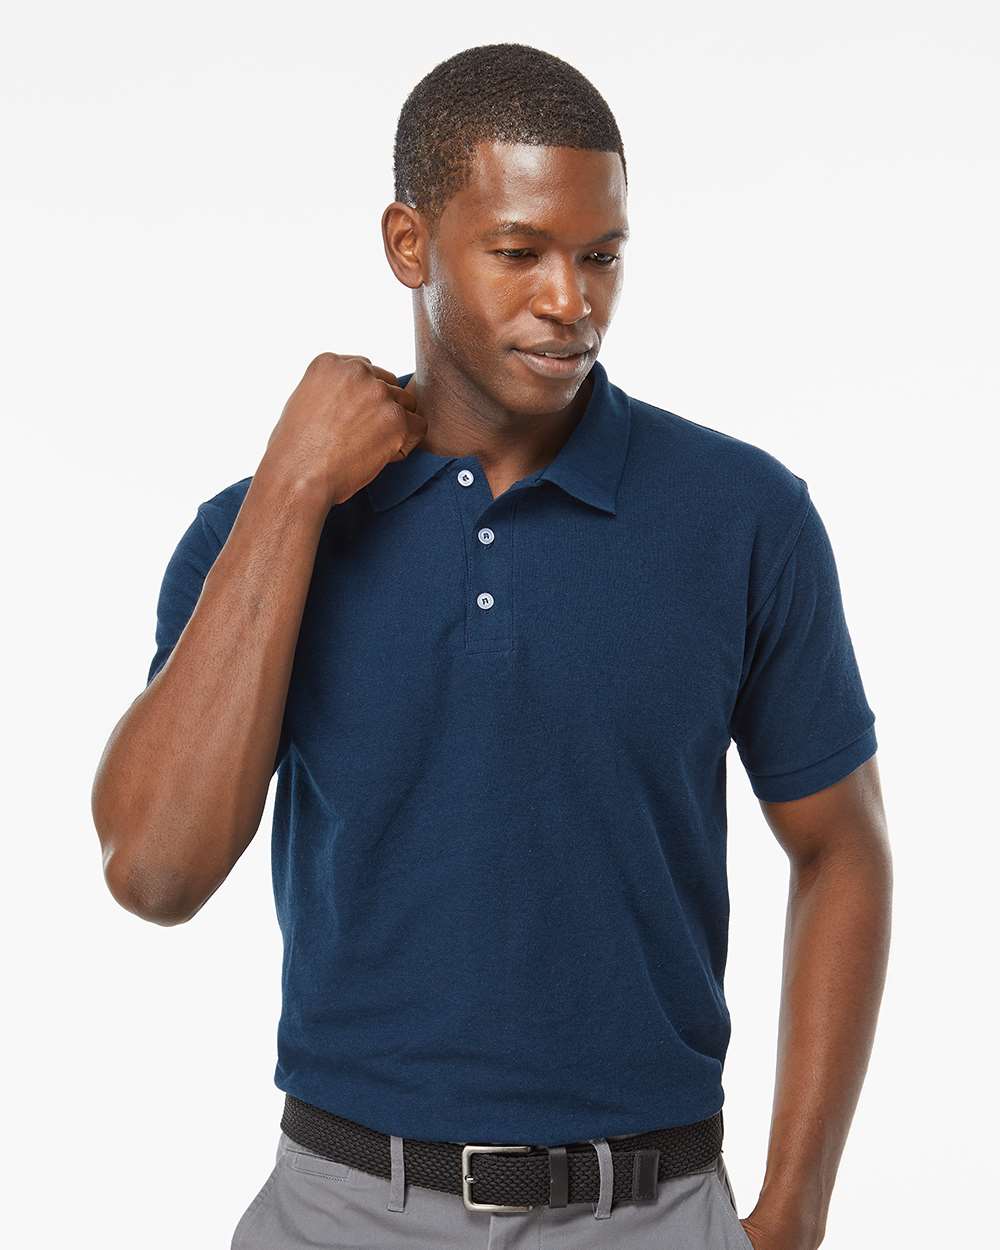 M&O Soft Touch Polo #7006 Navy